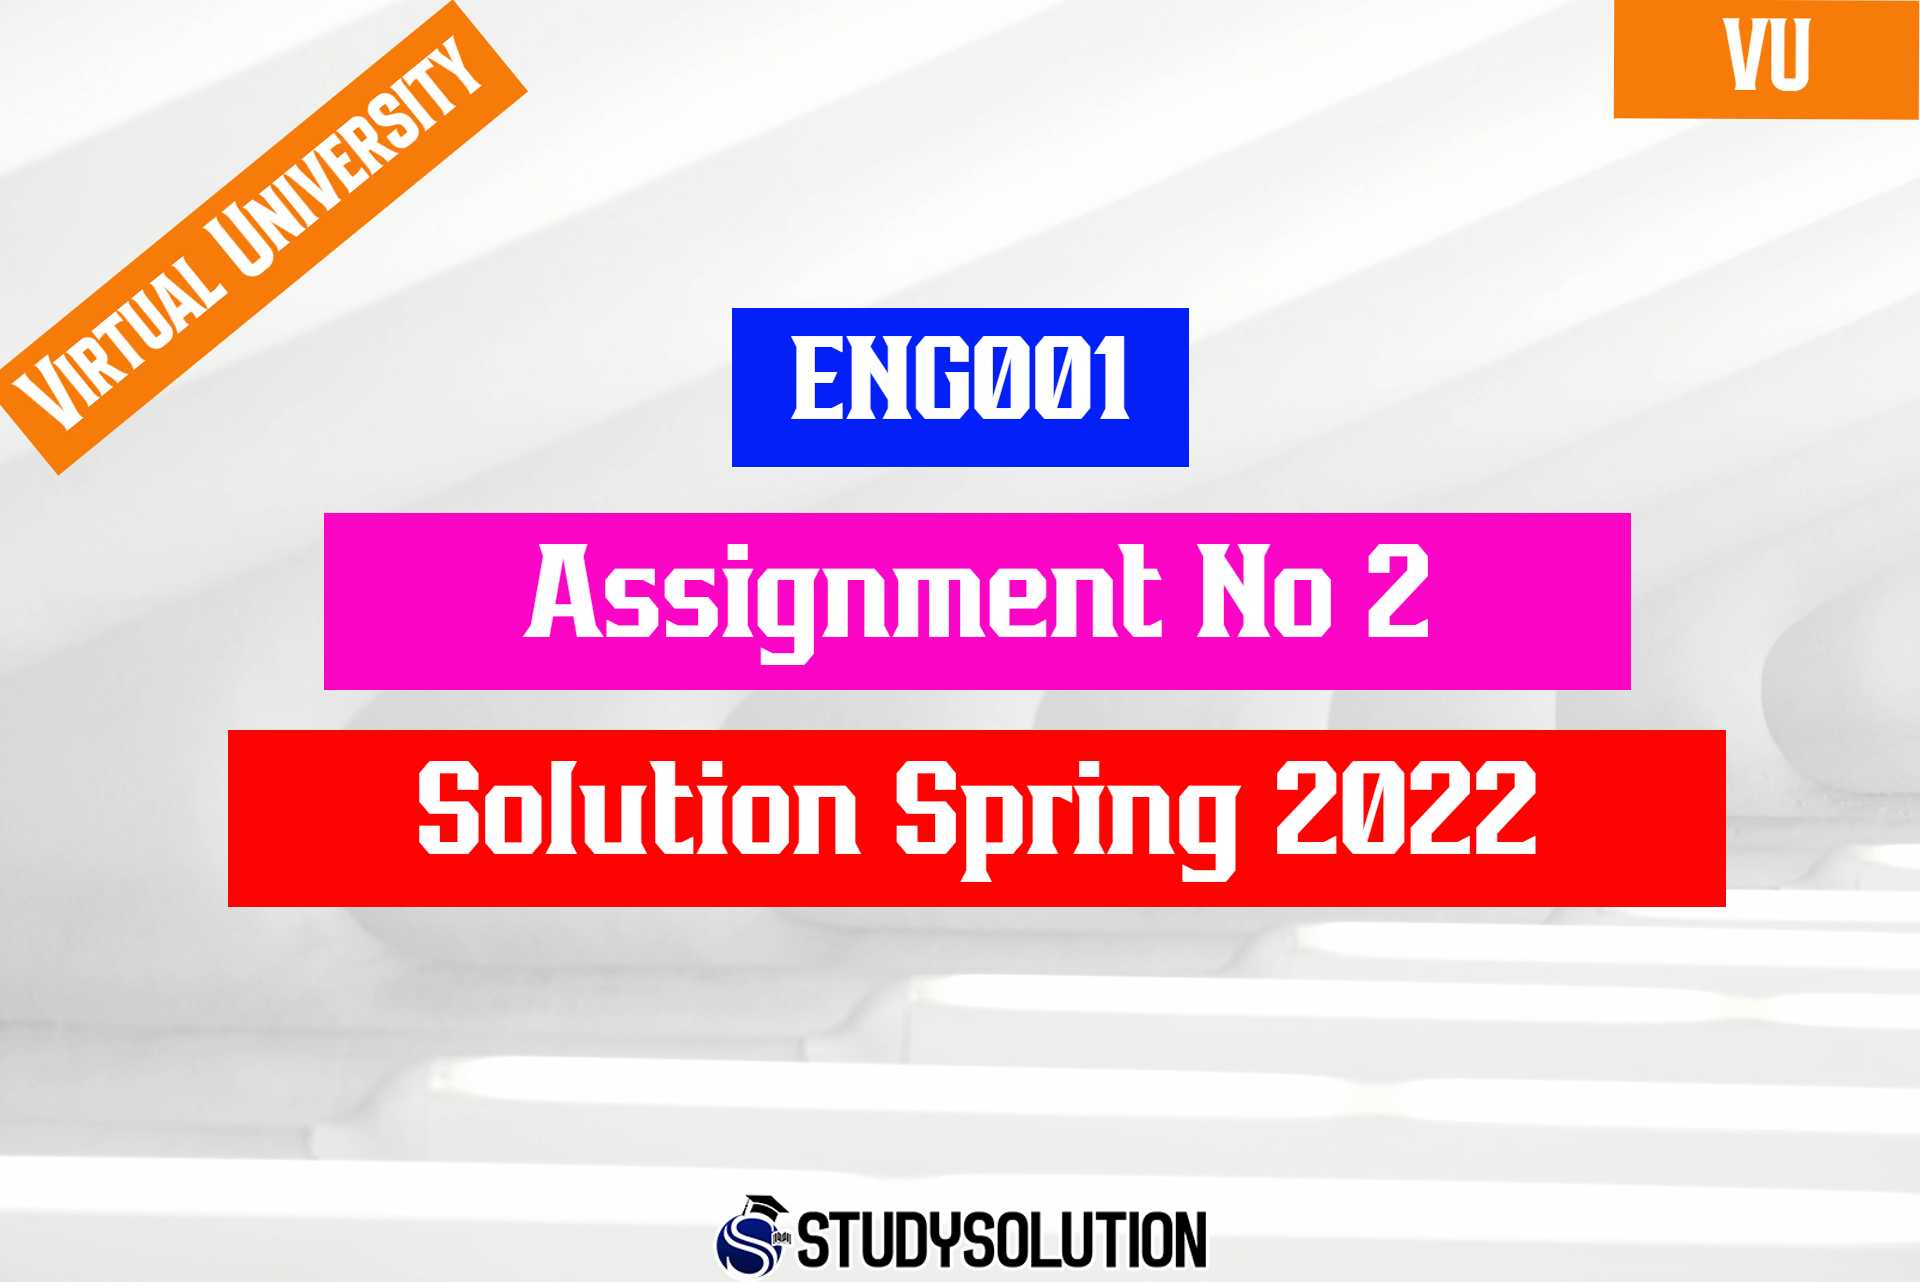 ENG001 Assignment No 2 Solution Spring 2022